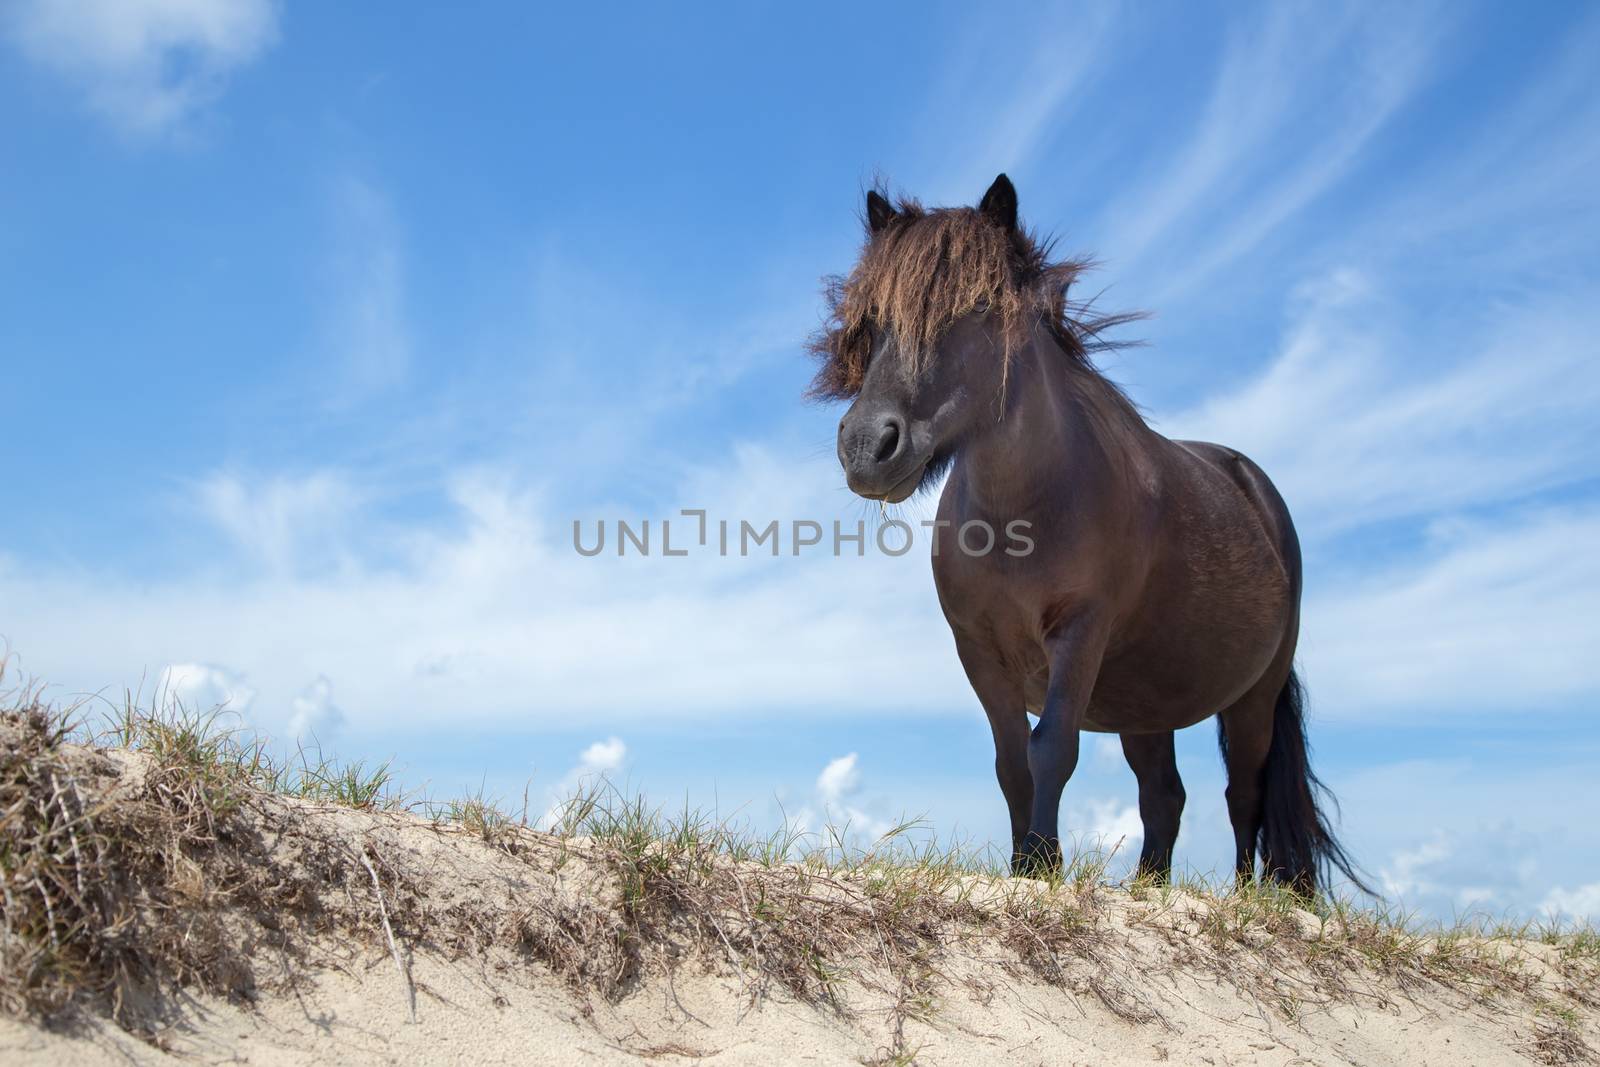 Black pony on sand with blue sky by BenSchonewille